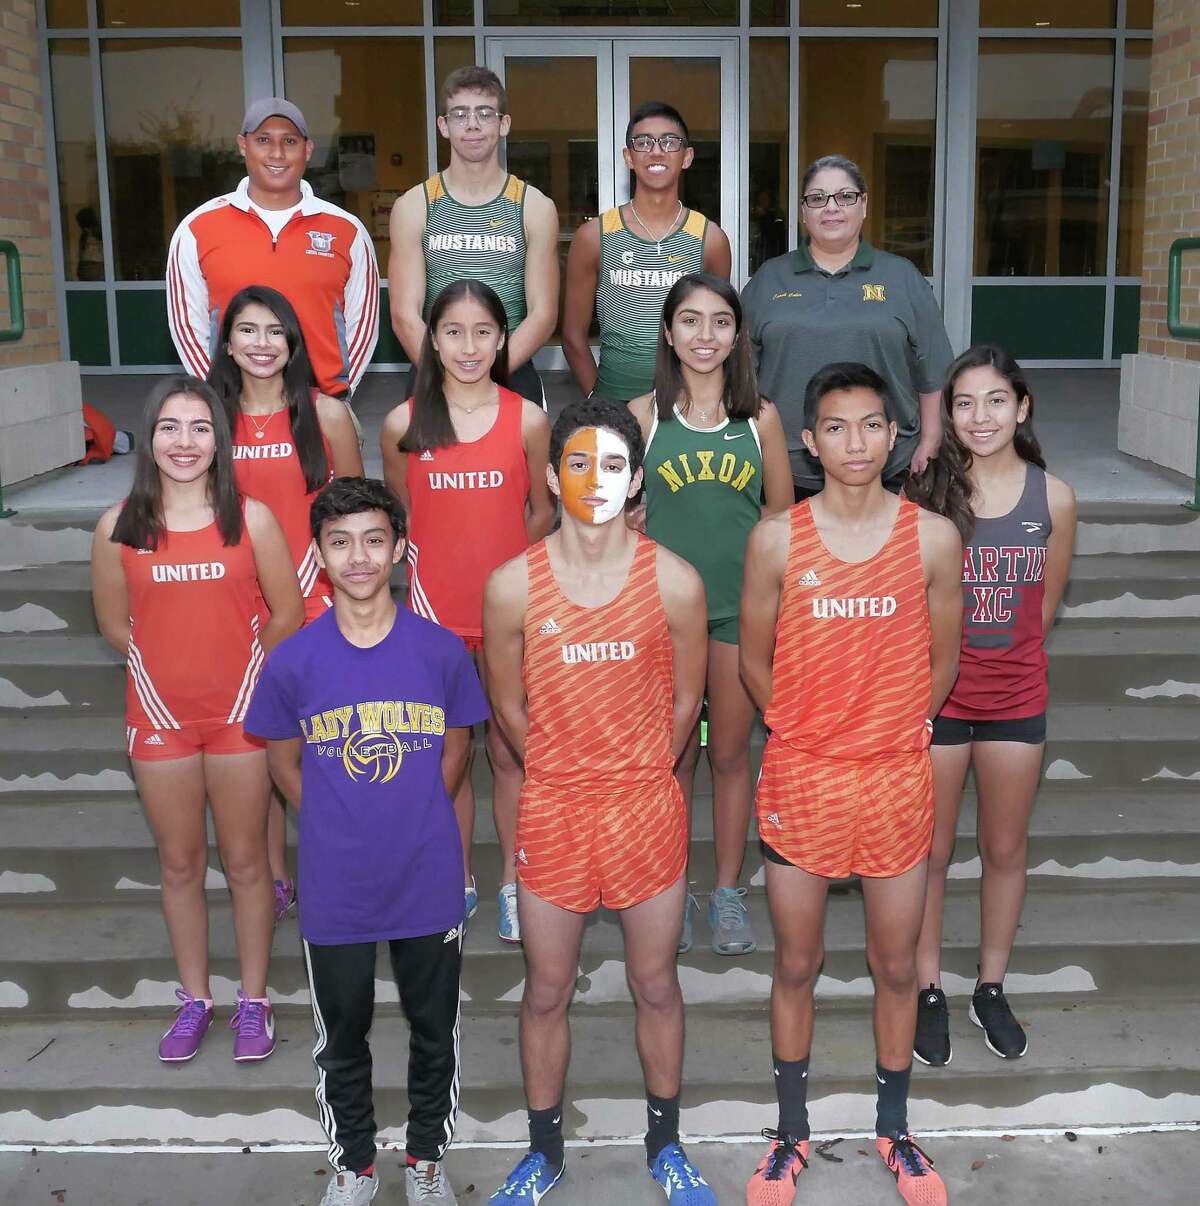 The 2017 Laredo Morning Times All-City team includes, in the front row, Chris Navarrete, Nicholas Martinez and Marcos Muñoz. In the second row are Magaly Lopez, Sabrina Peña, Elisa Perlata, Alexa Rodriguez and Samantha Gonzalez, and in the back row are coach Eddie Gonzalez, Sean E. Bratton, Juan Salinas III and coach Lee Colin.